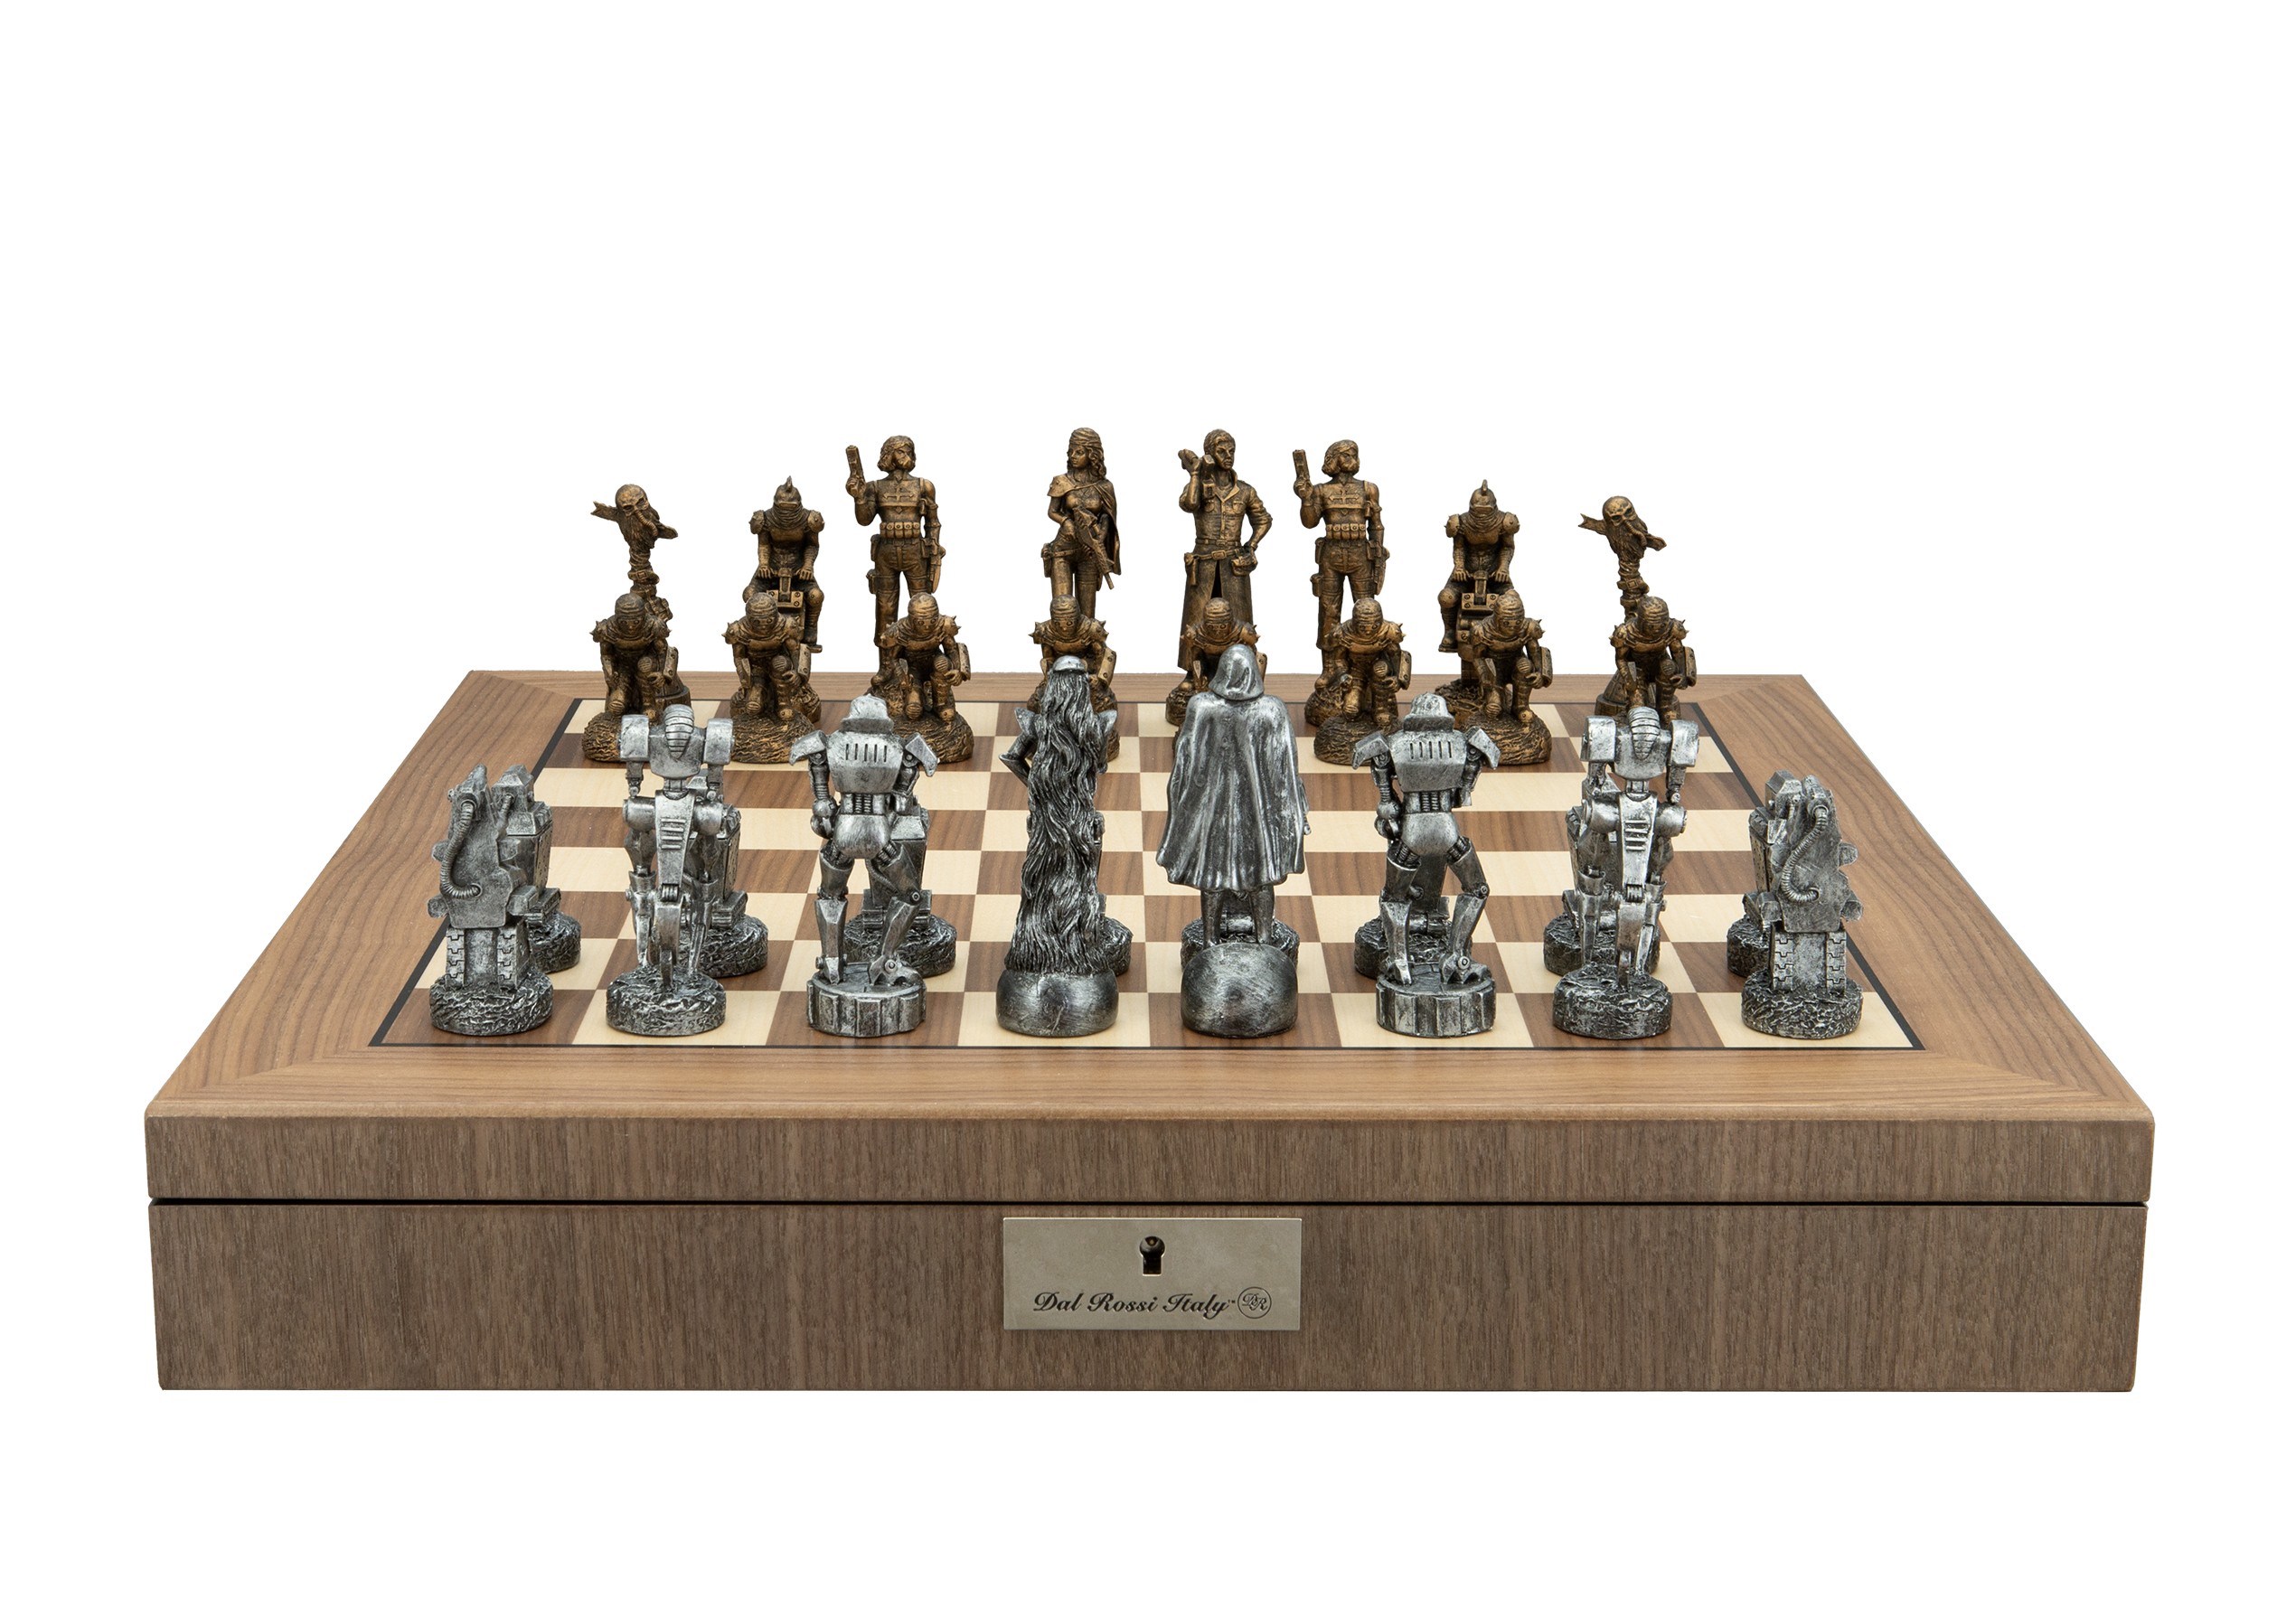 Dal Rossi  Mad Max Robot Chess Pieces Polyresin on a Walnut Inlaid Chess Box with Compartments 20"